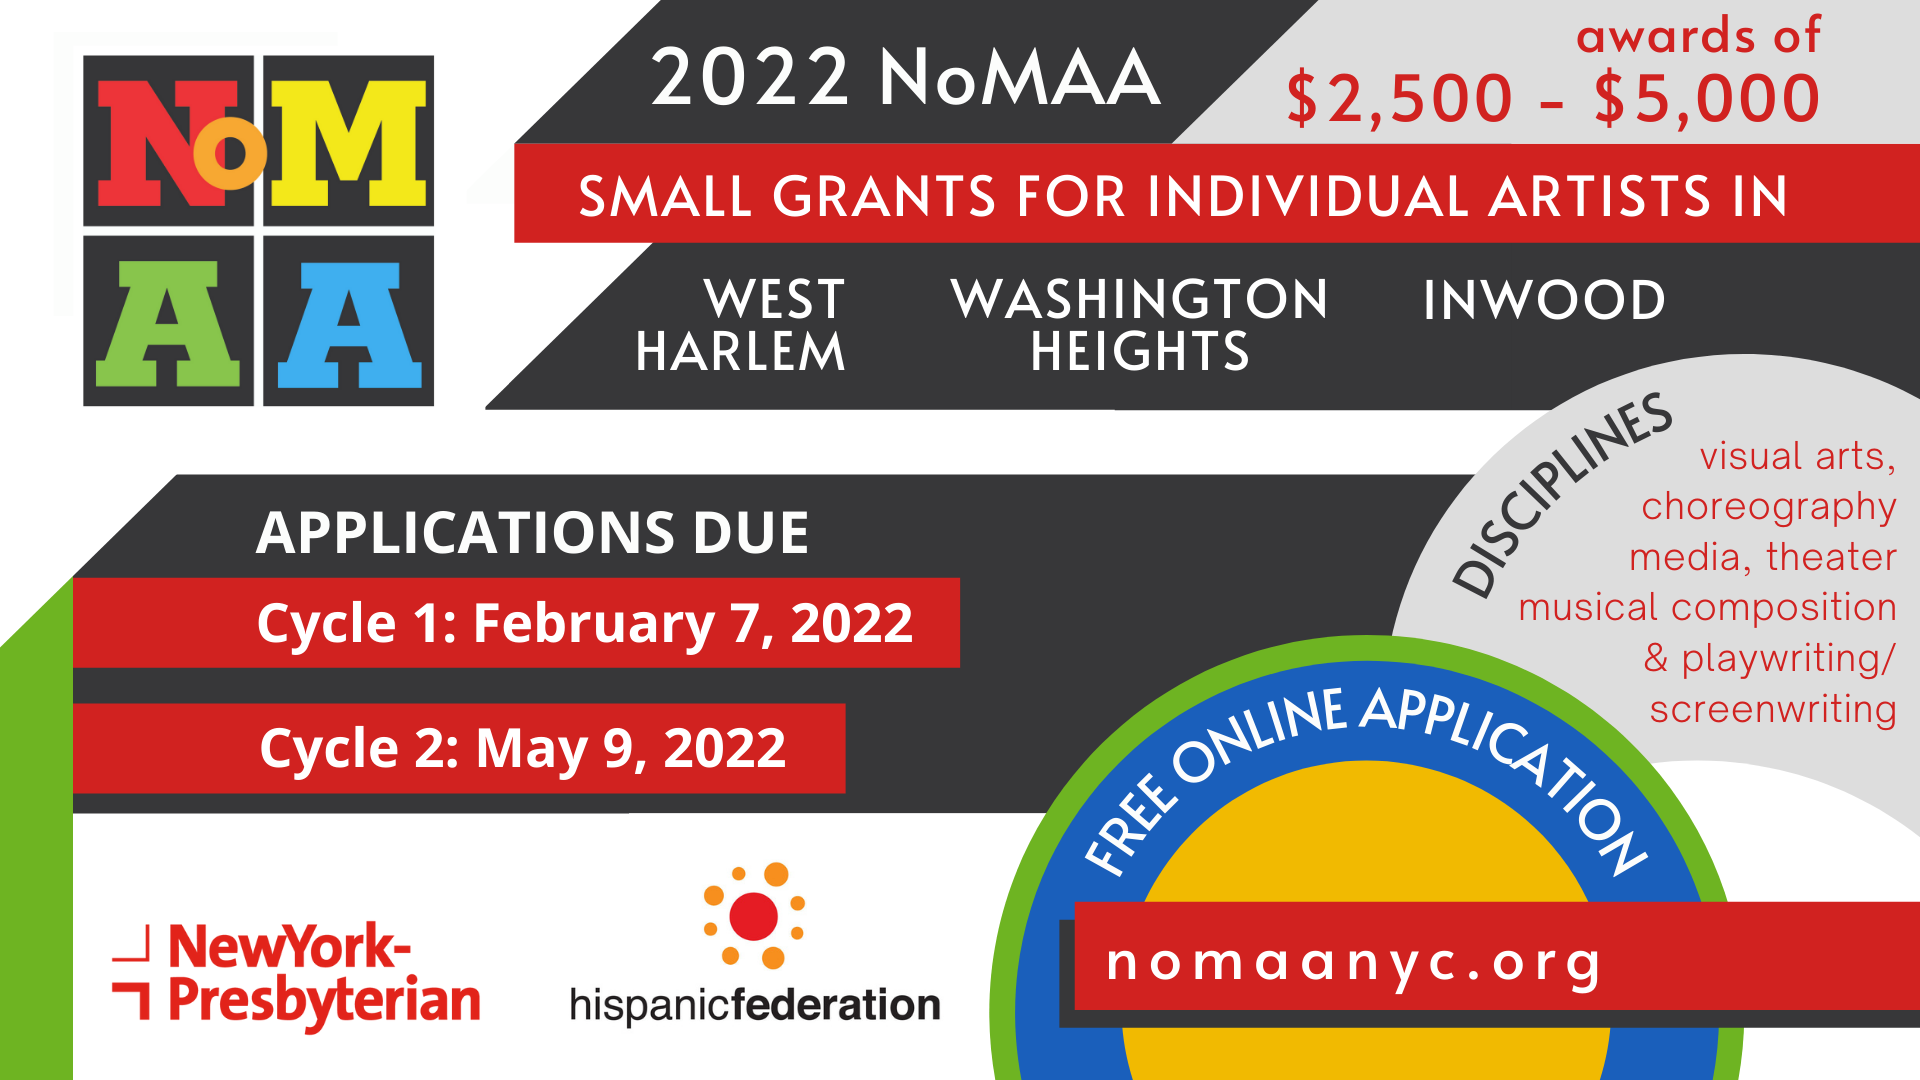 NoMAA 2022 Small Grants for Individual Artists